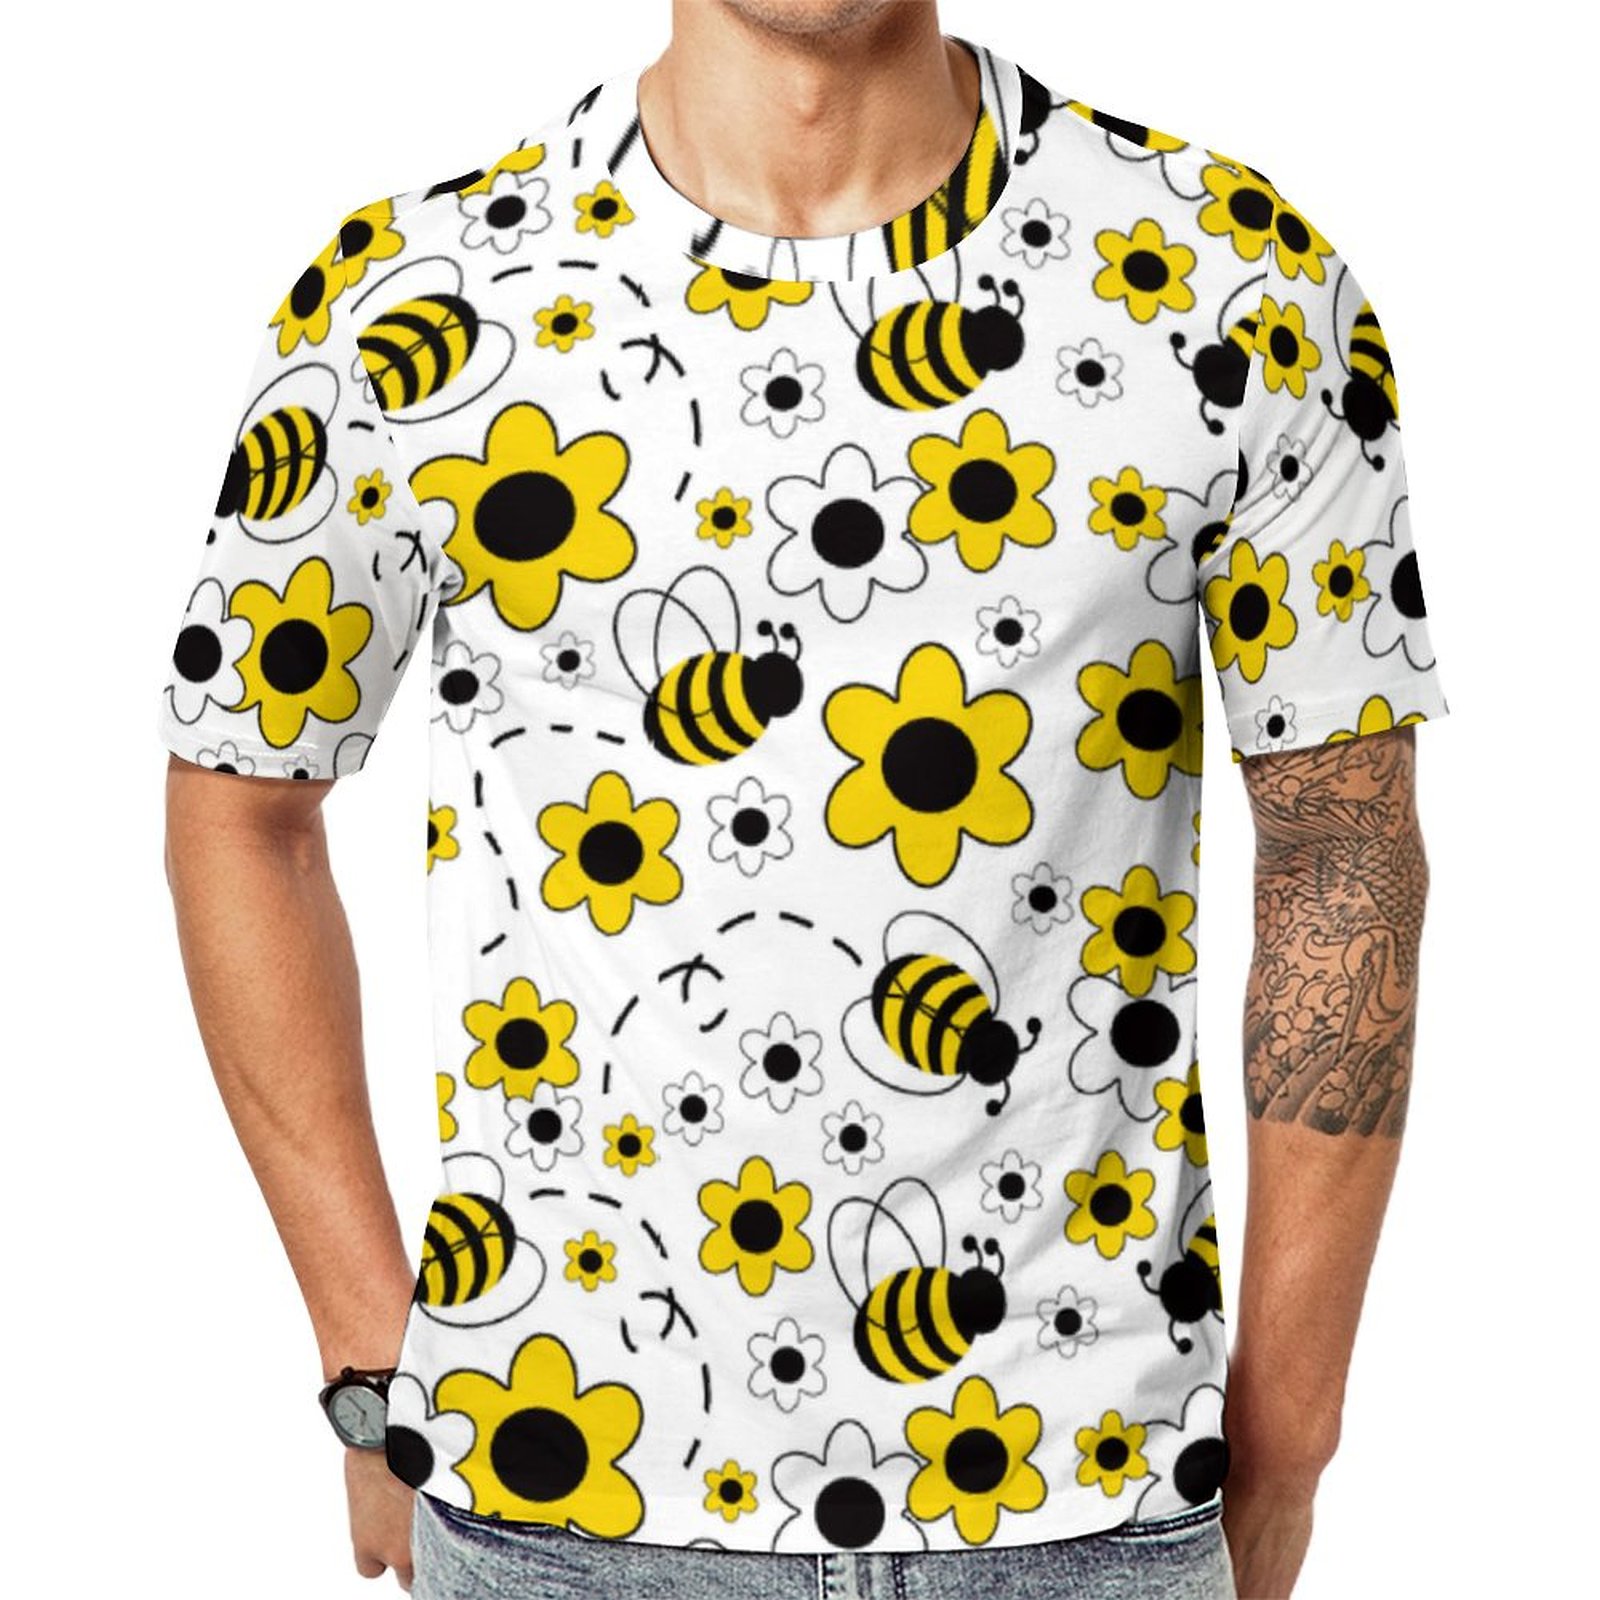 Honey Honeycomb Floral Brushed Plum Short Sleeve Print Unisex Tshirt Summer Casual Tees for Men and Women Coolcoshirts